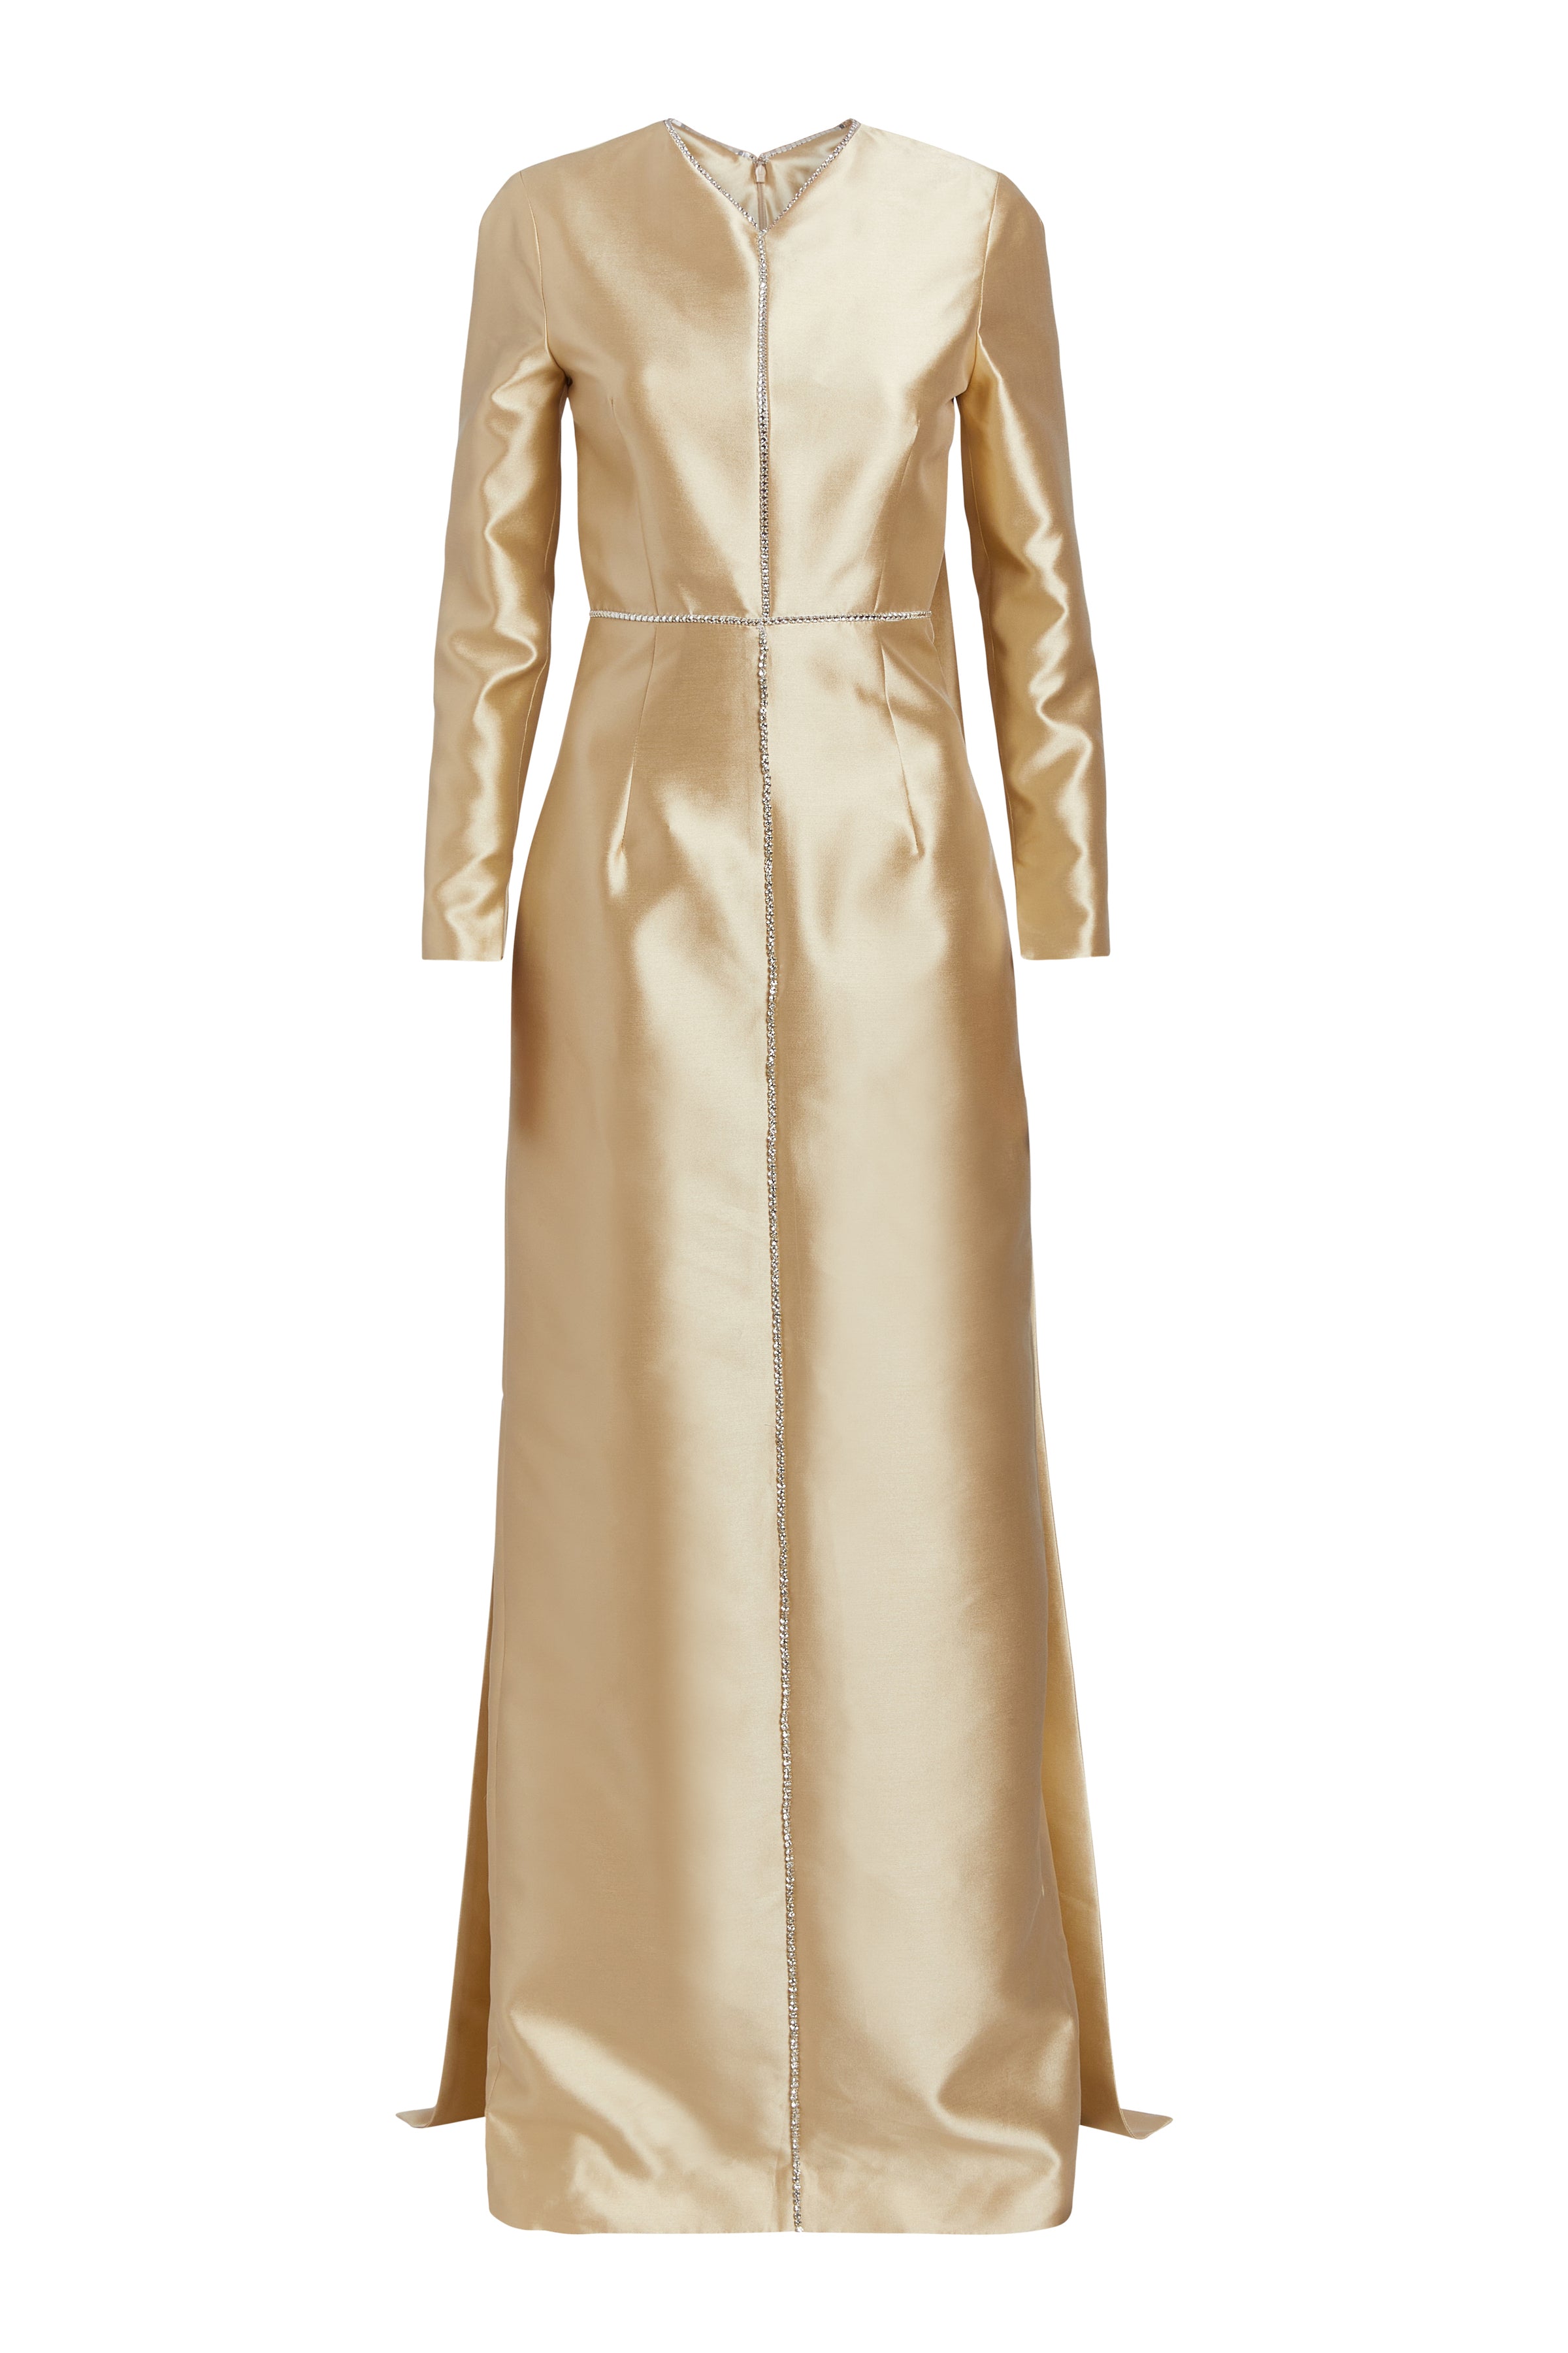 Rosamund Champagne Long Sleeve Gown